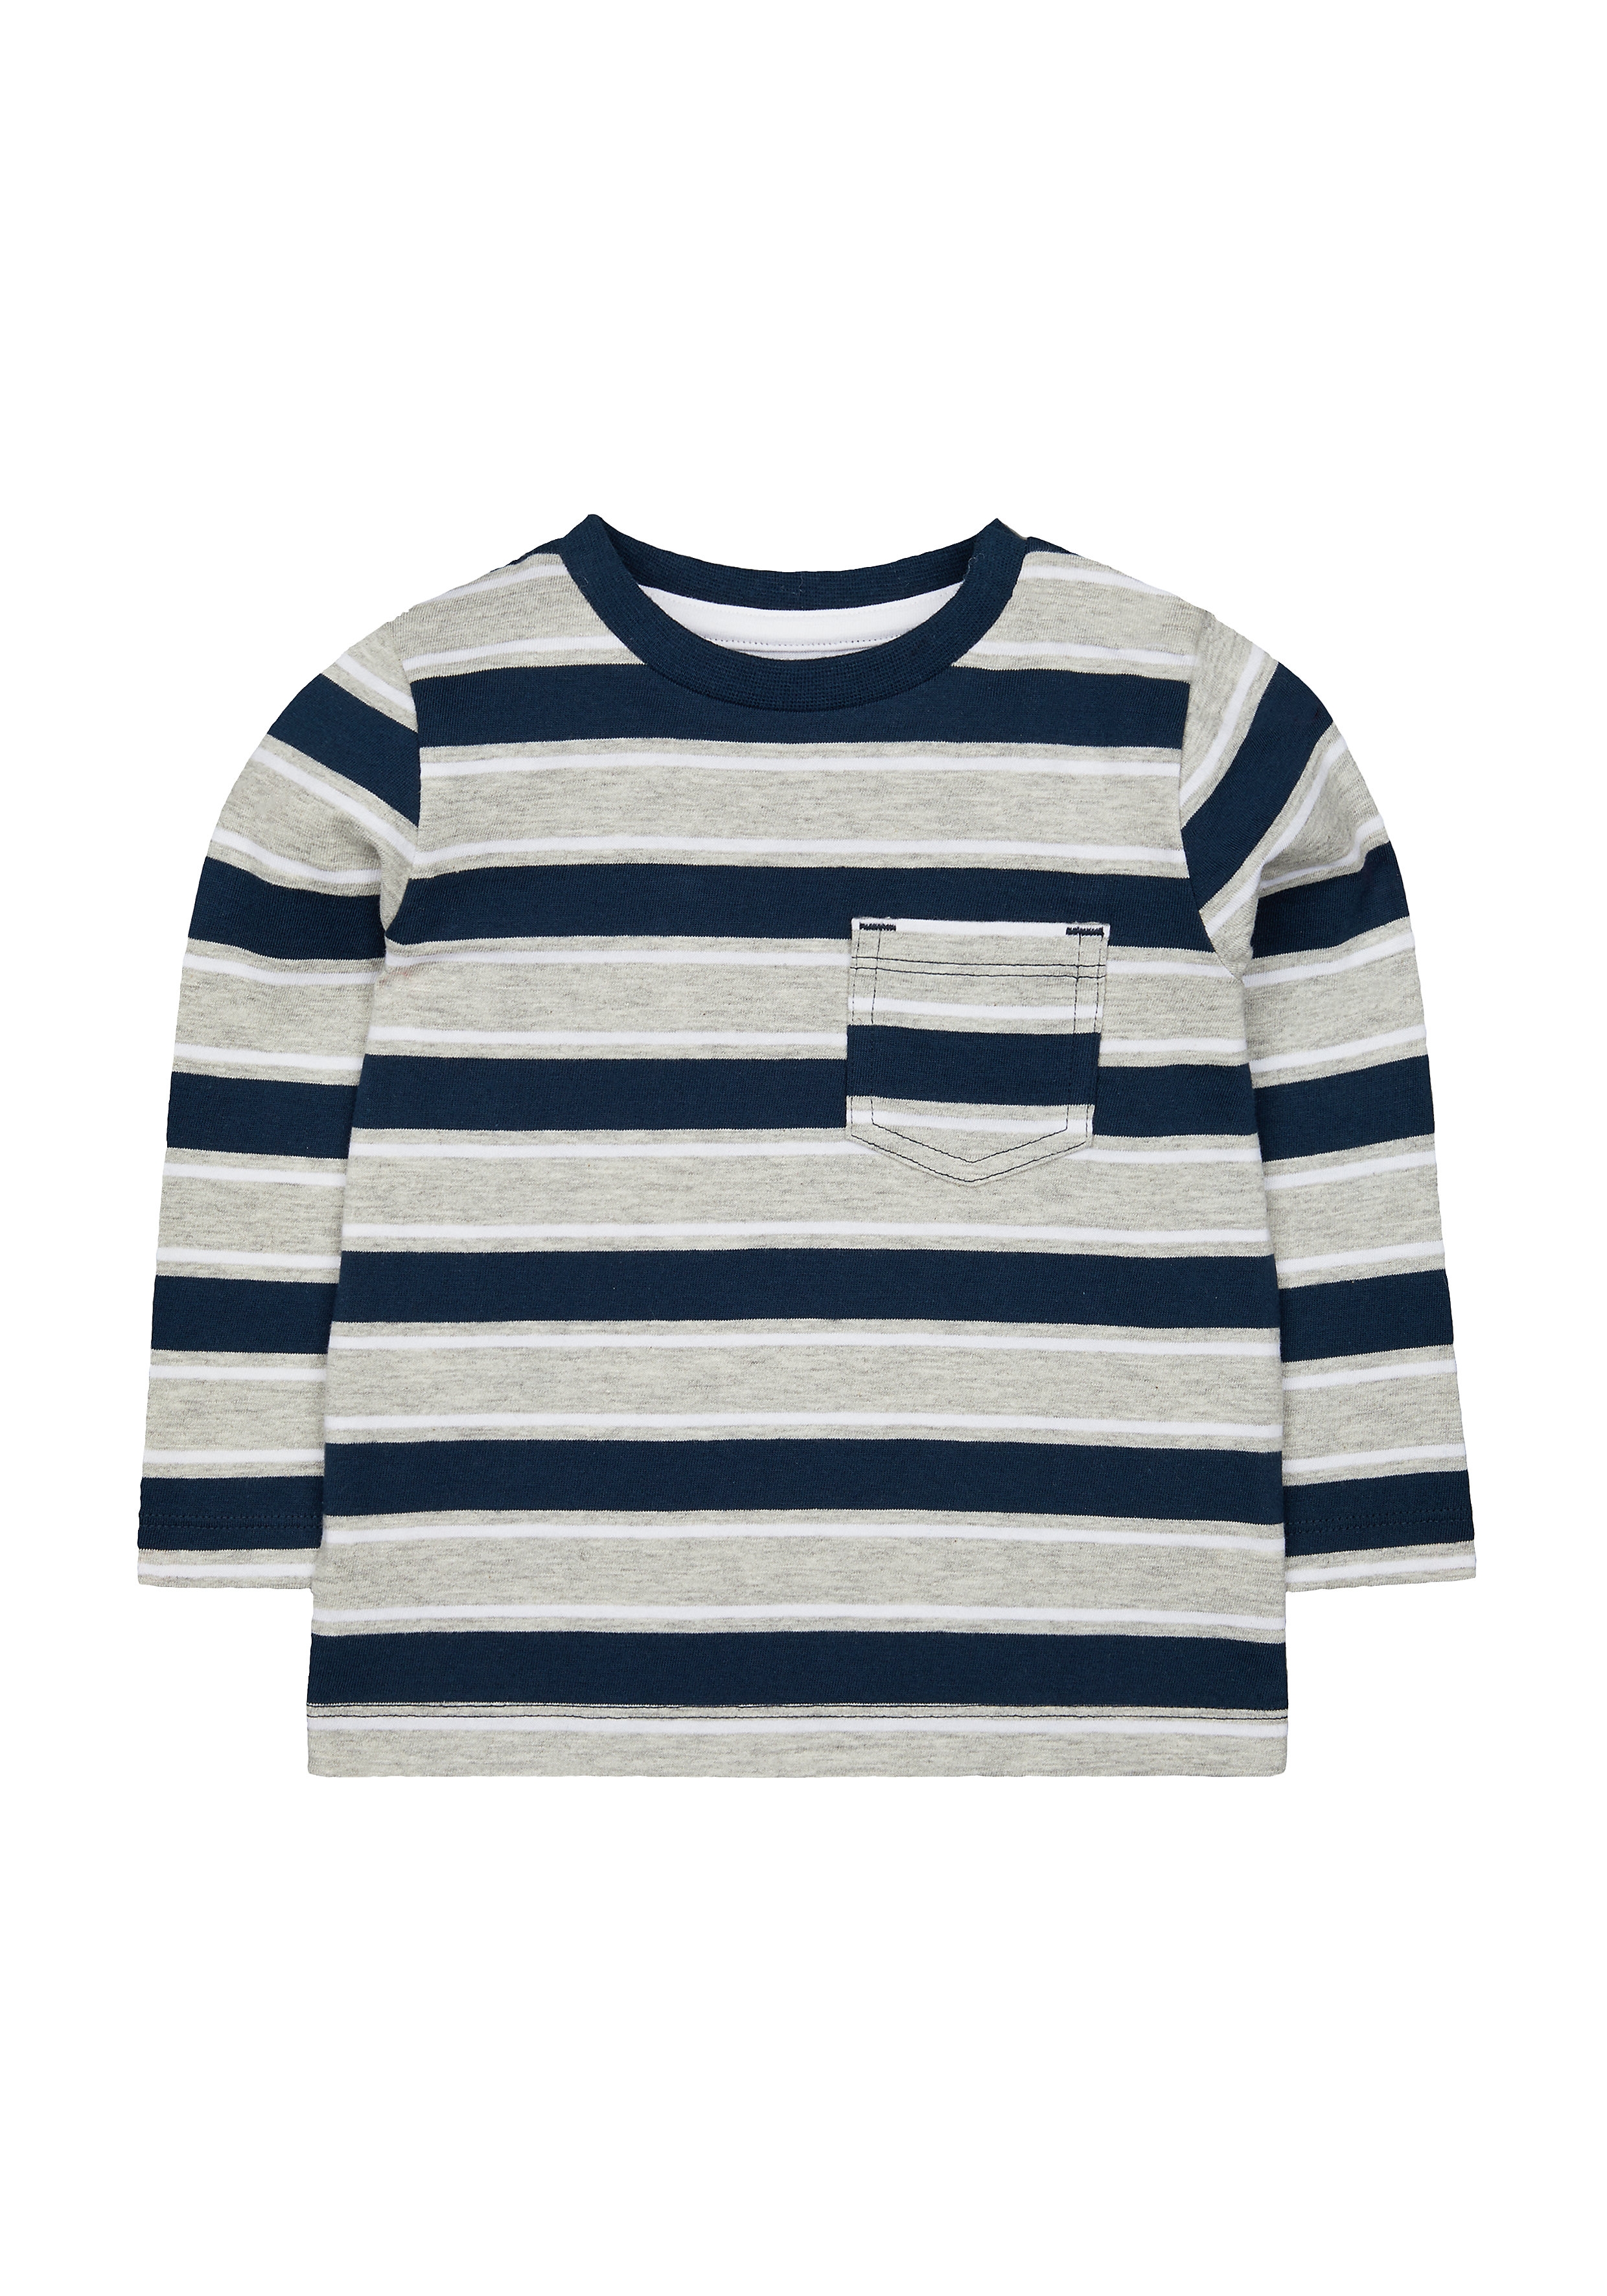 Mothercare | Boys Full Sleeves T-Shirt Striped - Multicolor 0